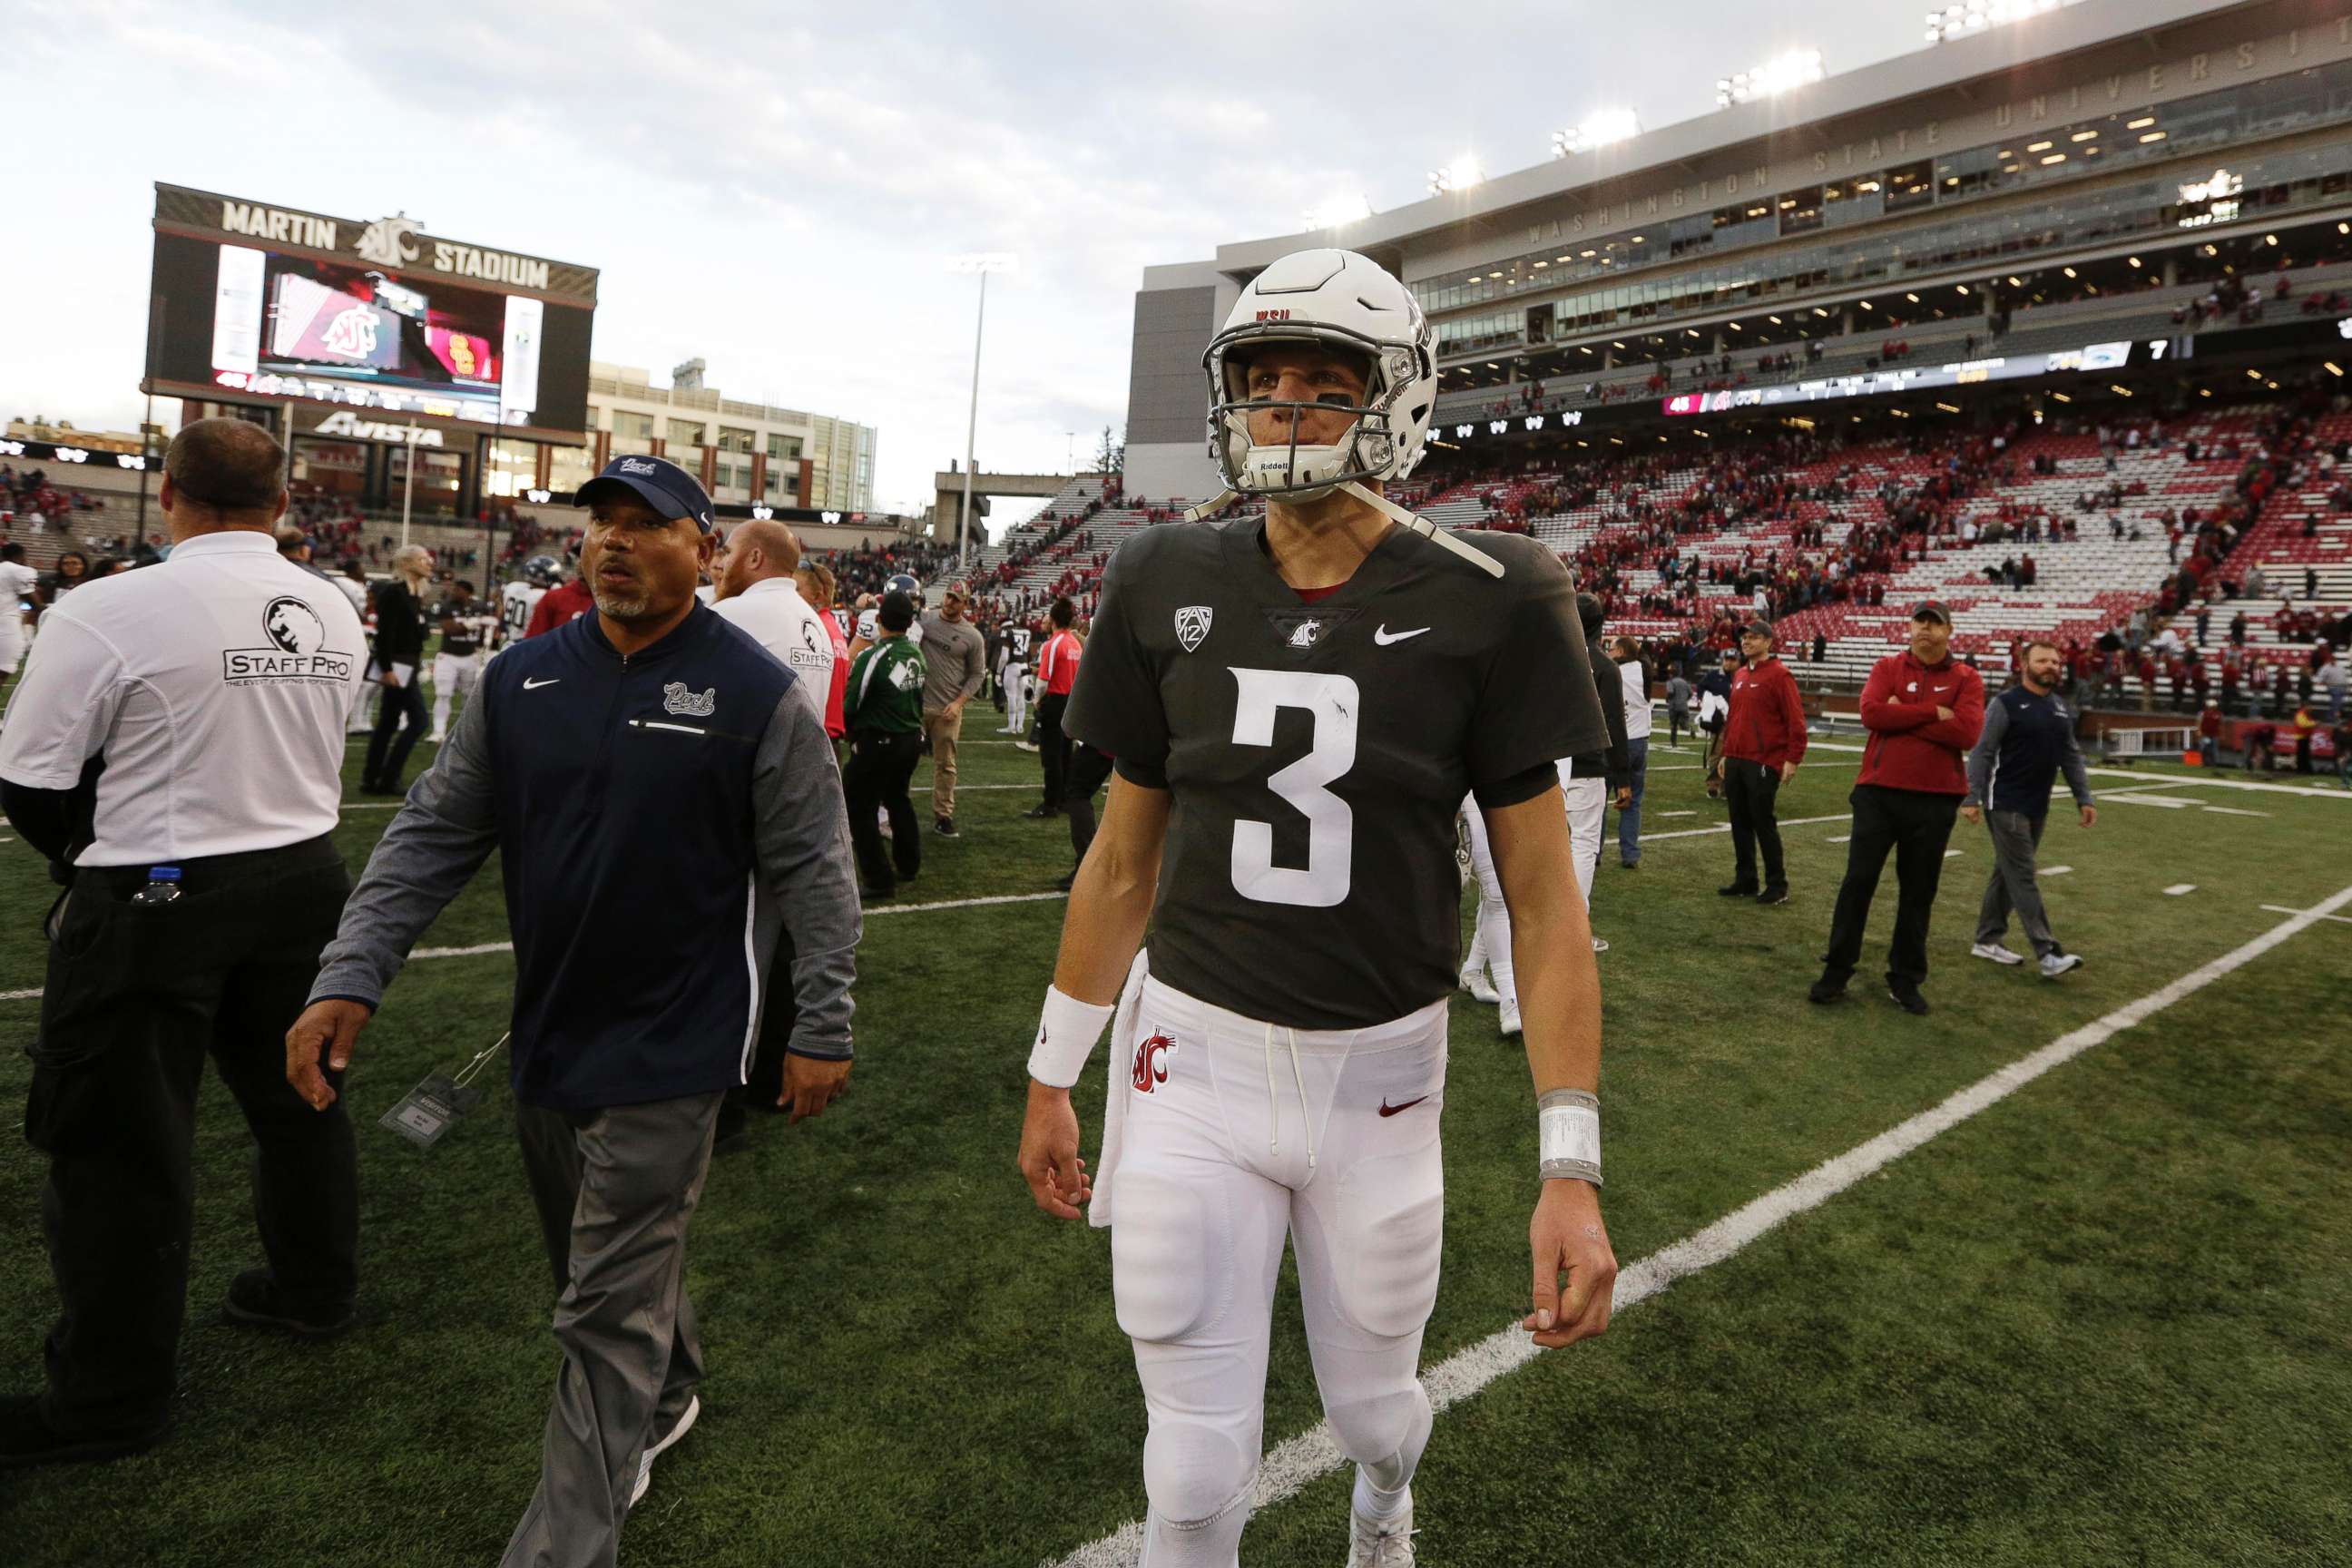 PHOTO: Washington State quarterback Tyler Hilinski (3) walks on the field after an NCAA college football game against Nevada in Pullman, Wash., Sept. 23, 2017.